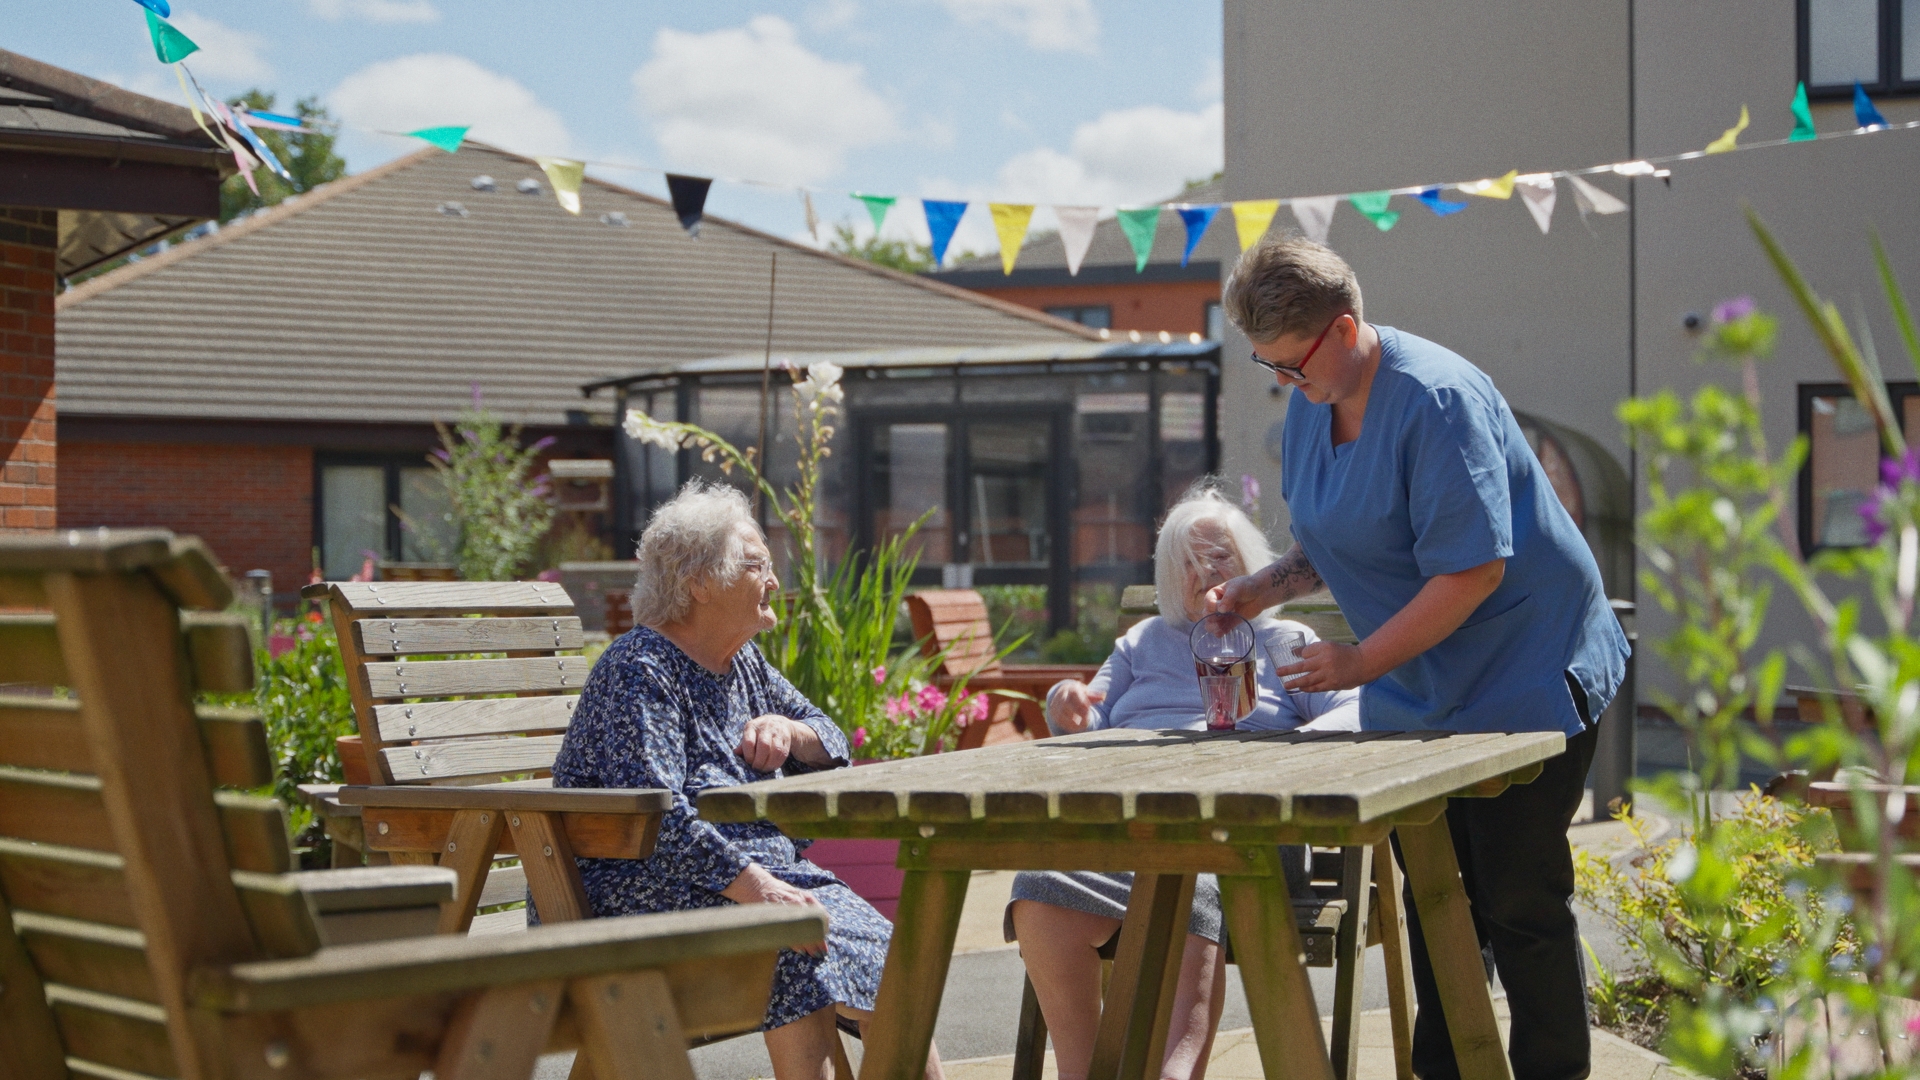 Residents at Chirk Court enjoying the outside seating area with staff member pouring a drink.